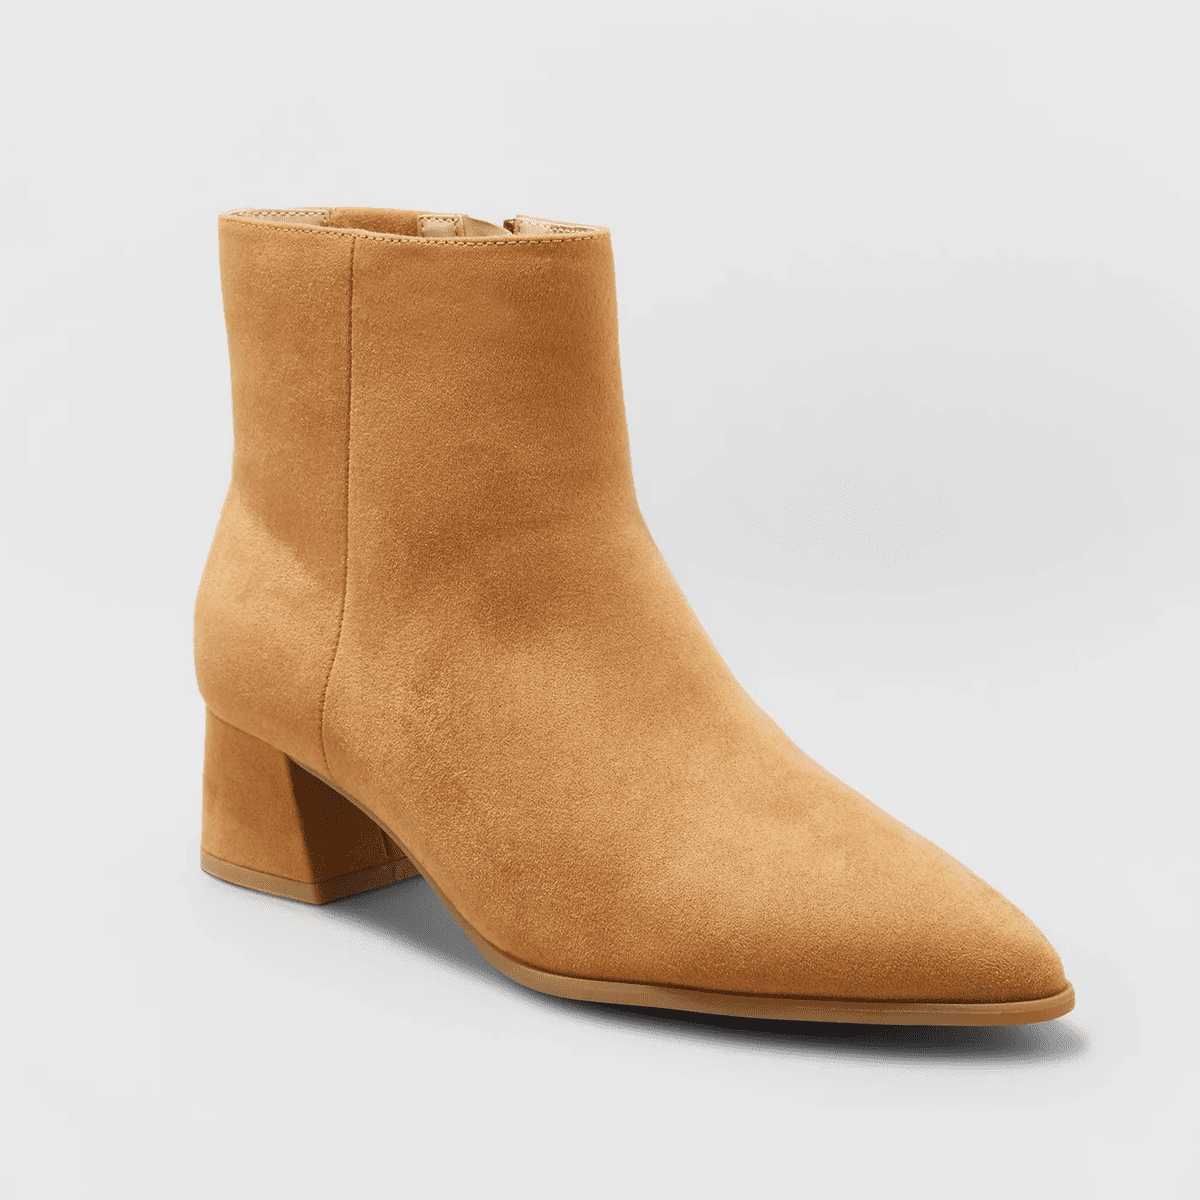 Target Fall Boots Sale